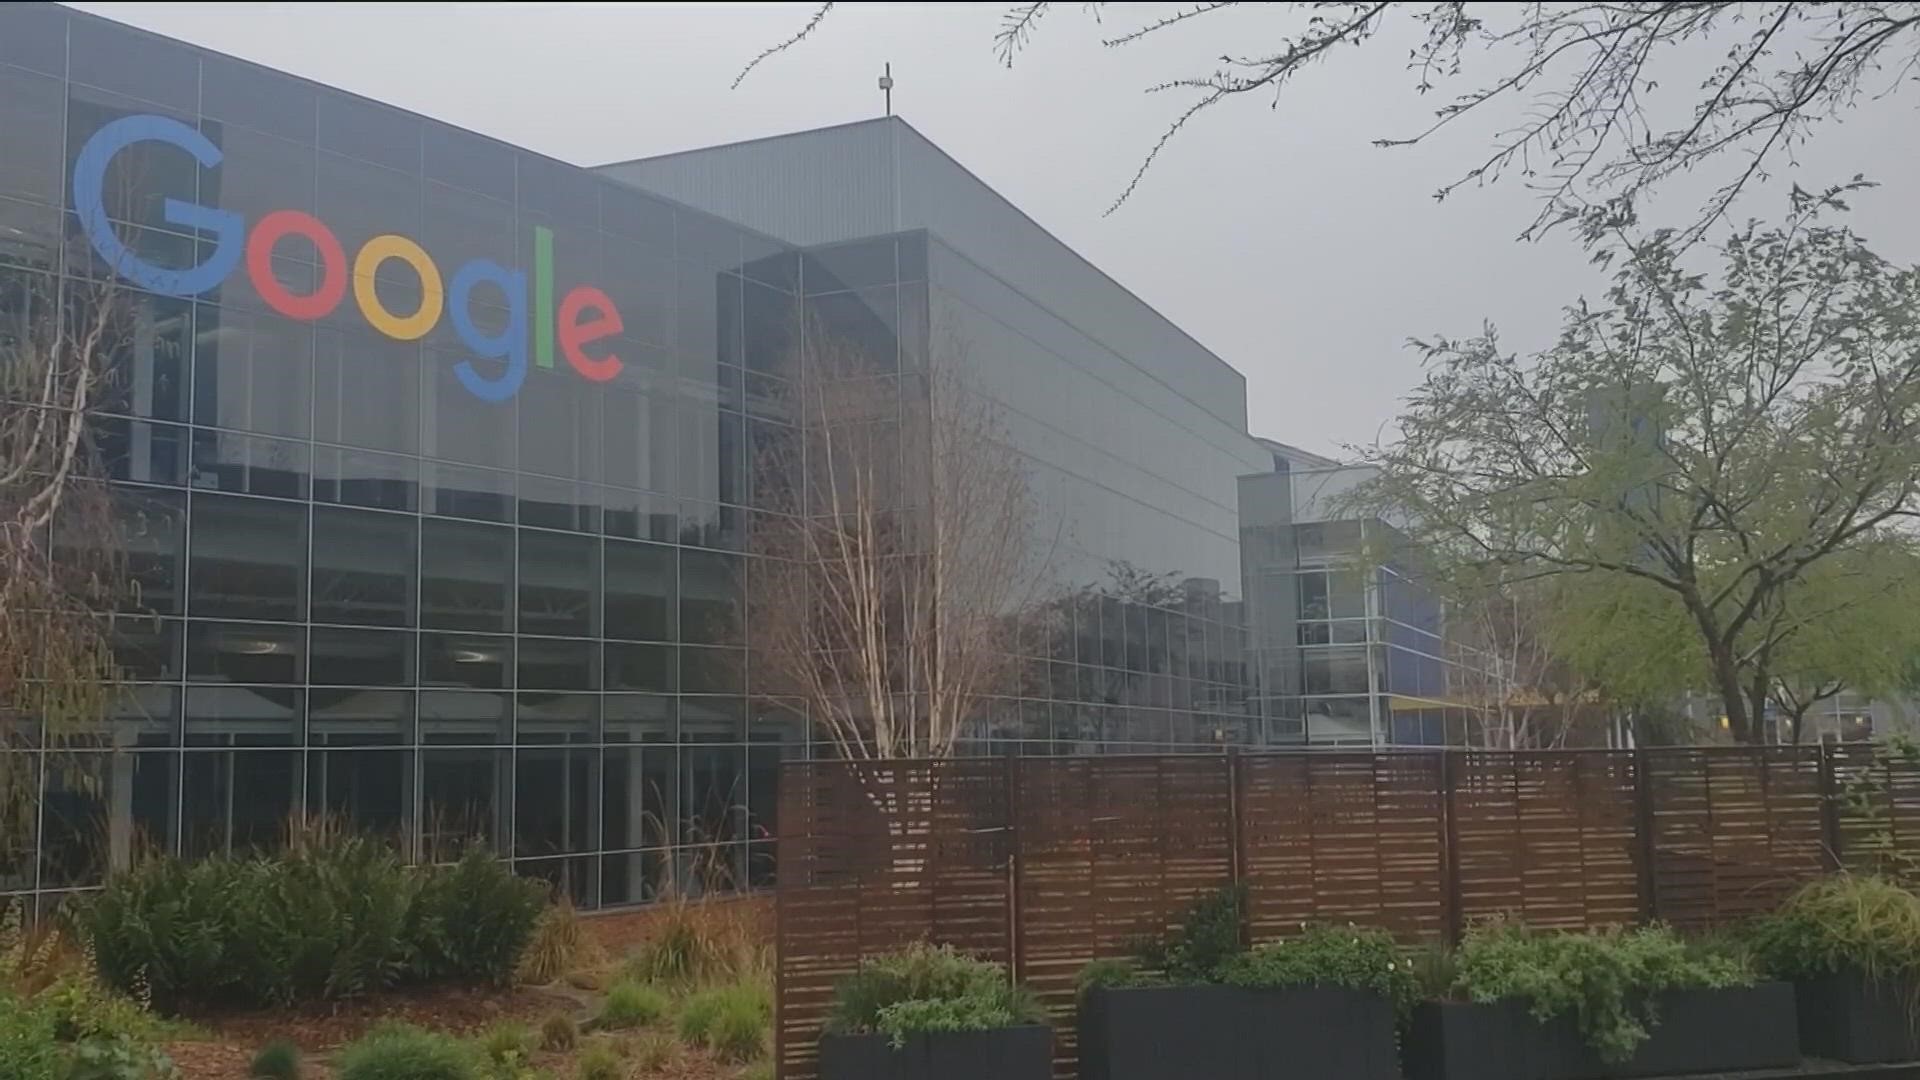 Google announced a 12,000 job cut last week. However, the bigger picture is jobs are surging.